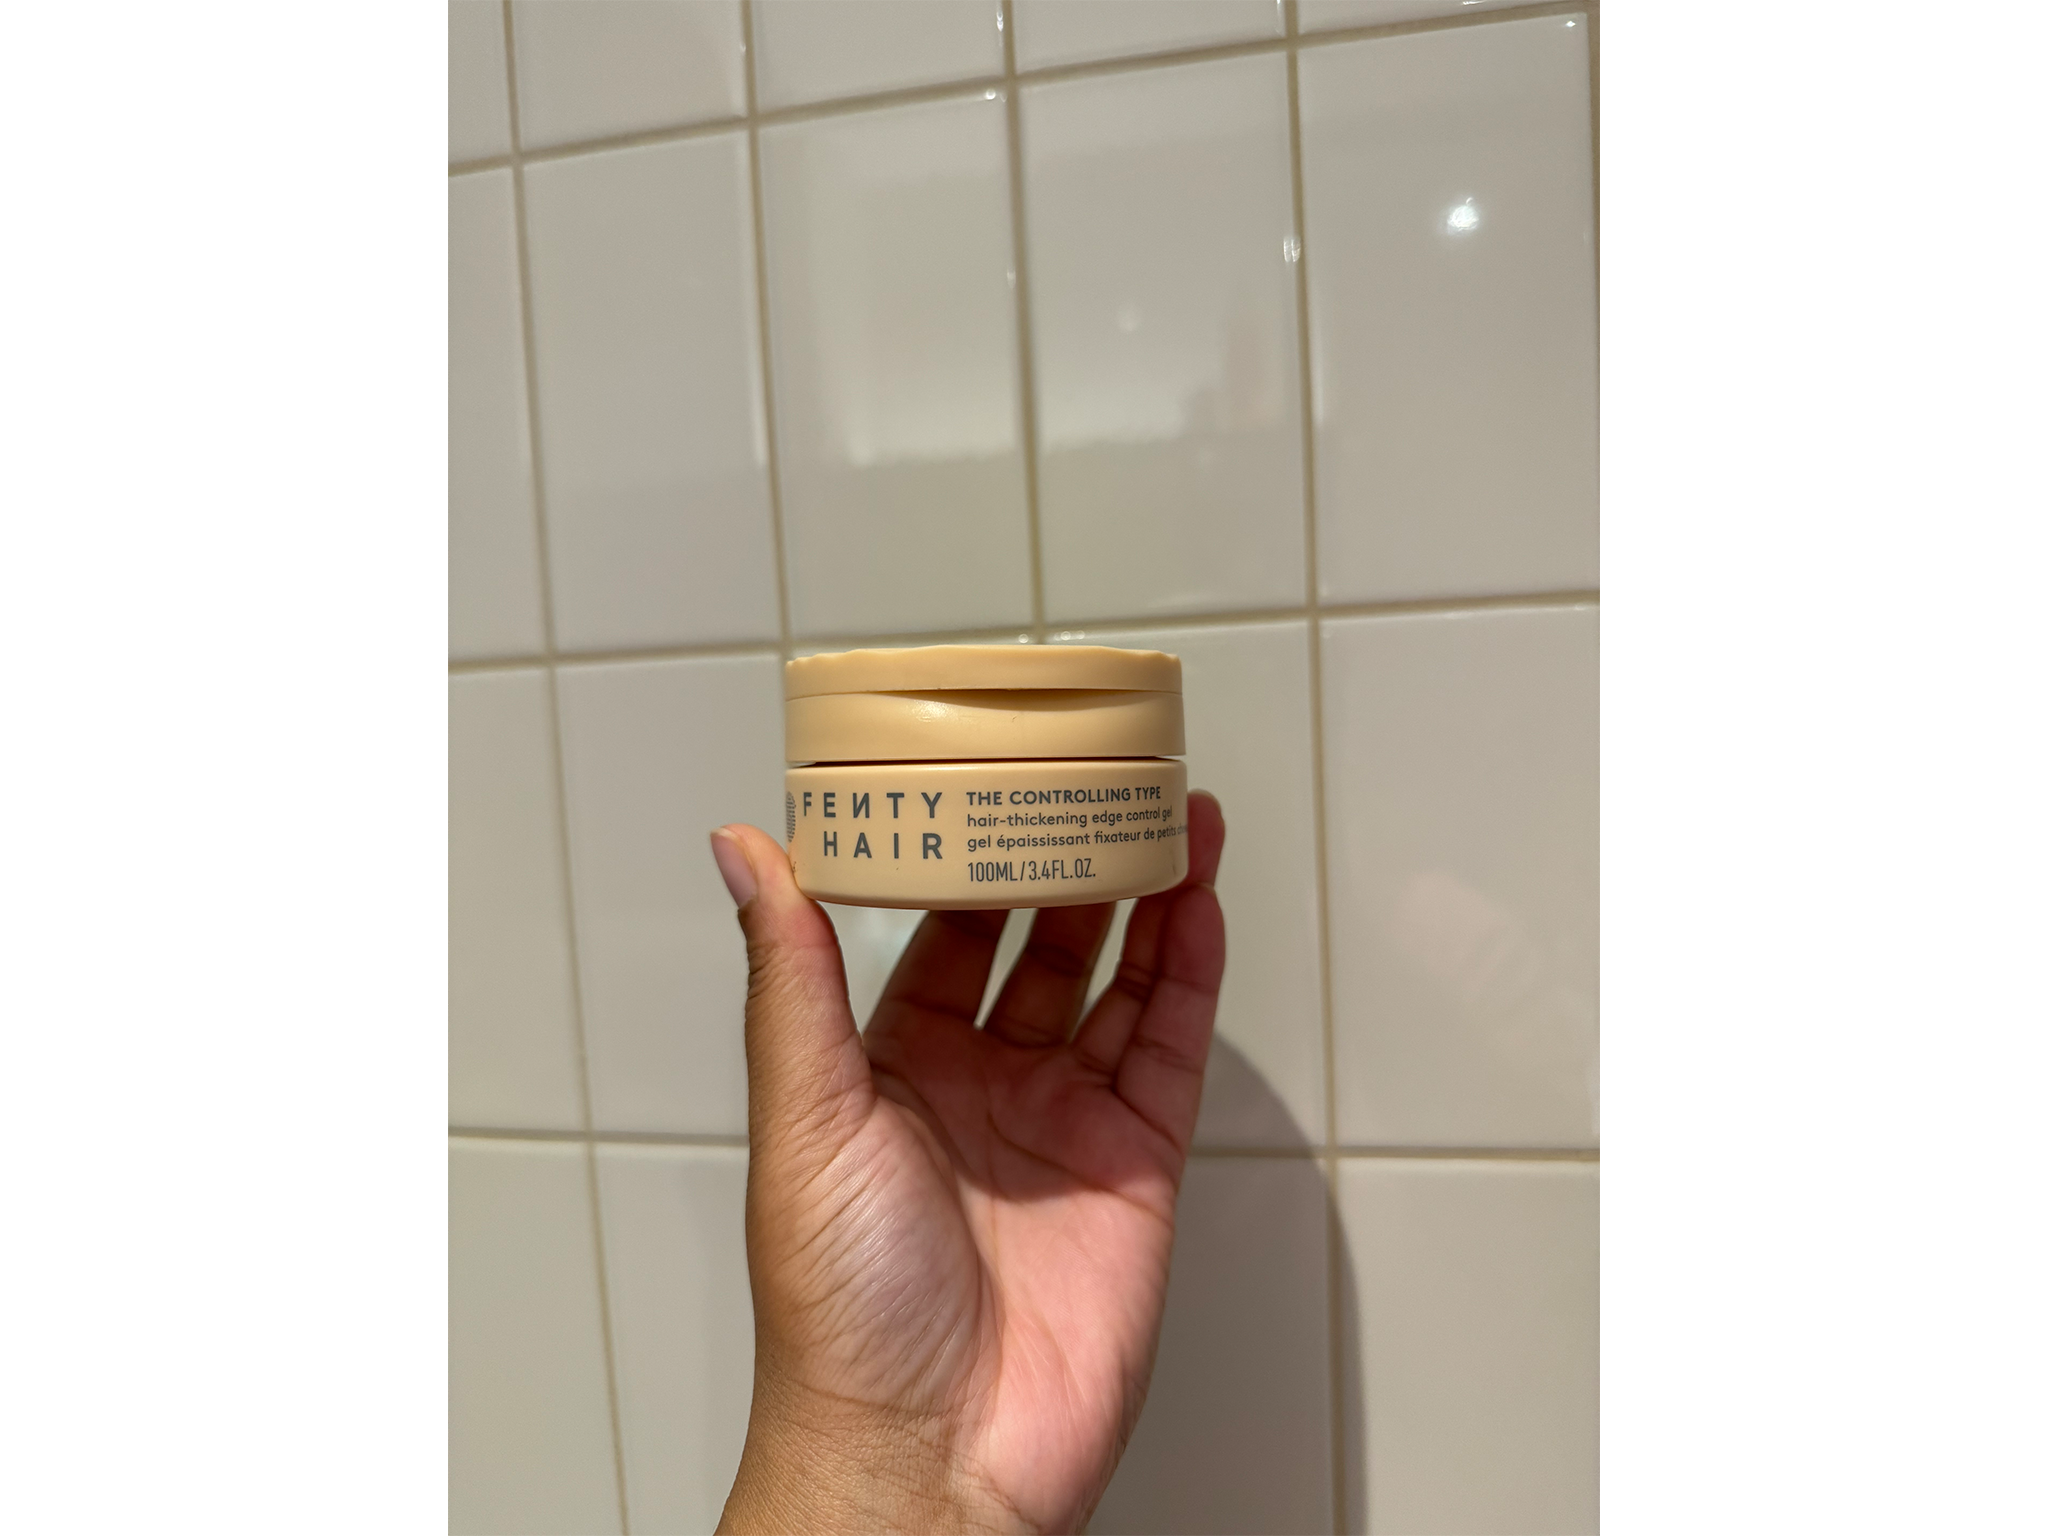 Fenty hair indybest review Fenty Hair the controlling type hair-thickening edge control gel